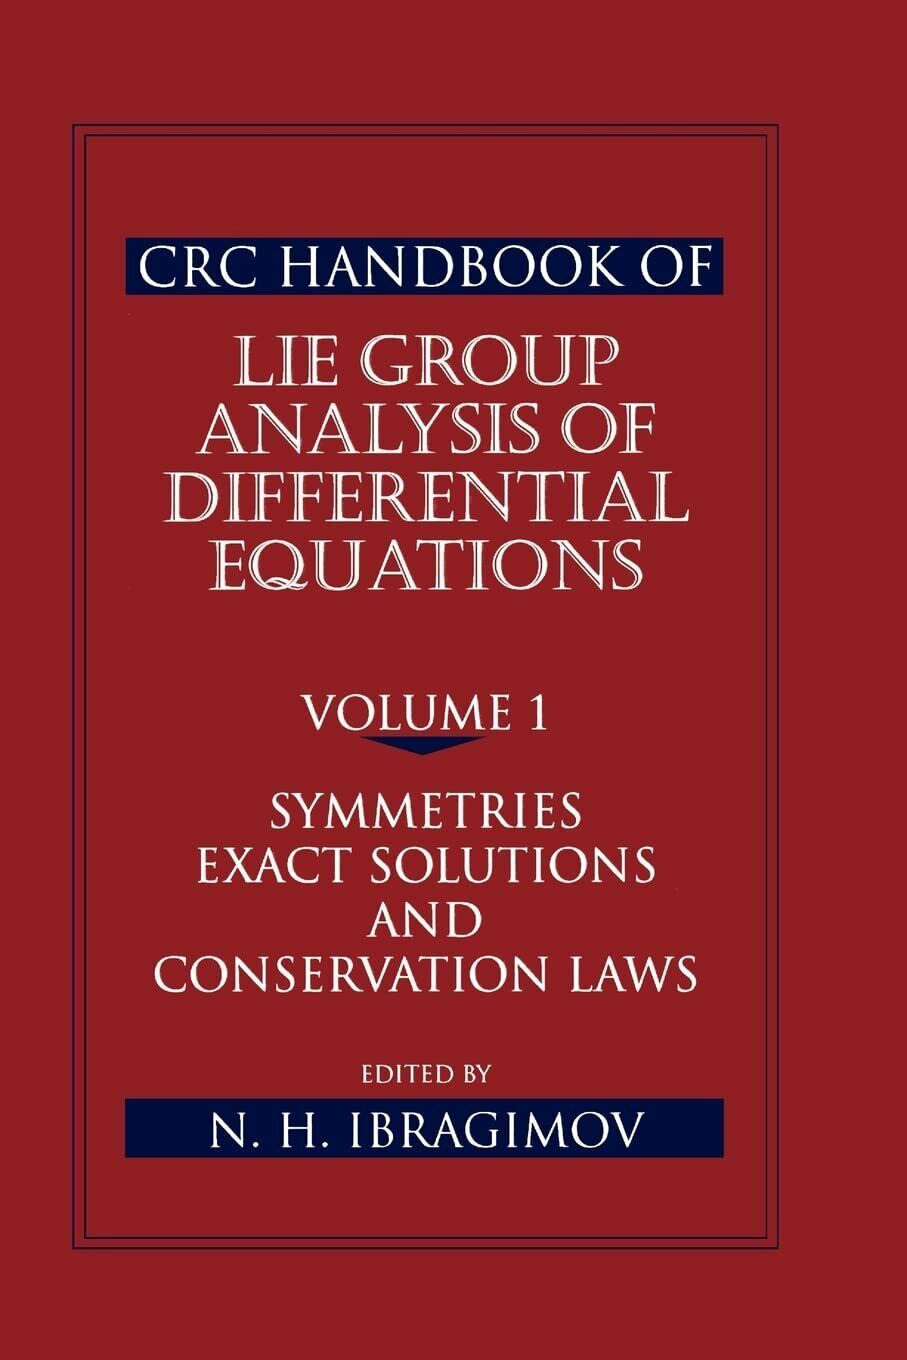 CRC Handbook of Lie Group Analysis of Differential Equations, Volume I - 1993